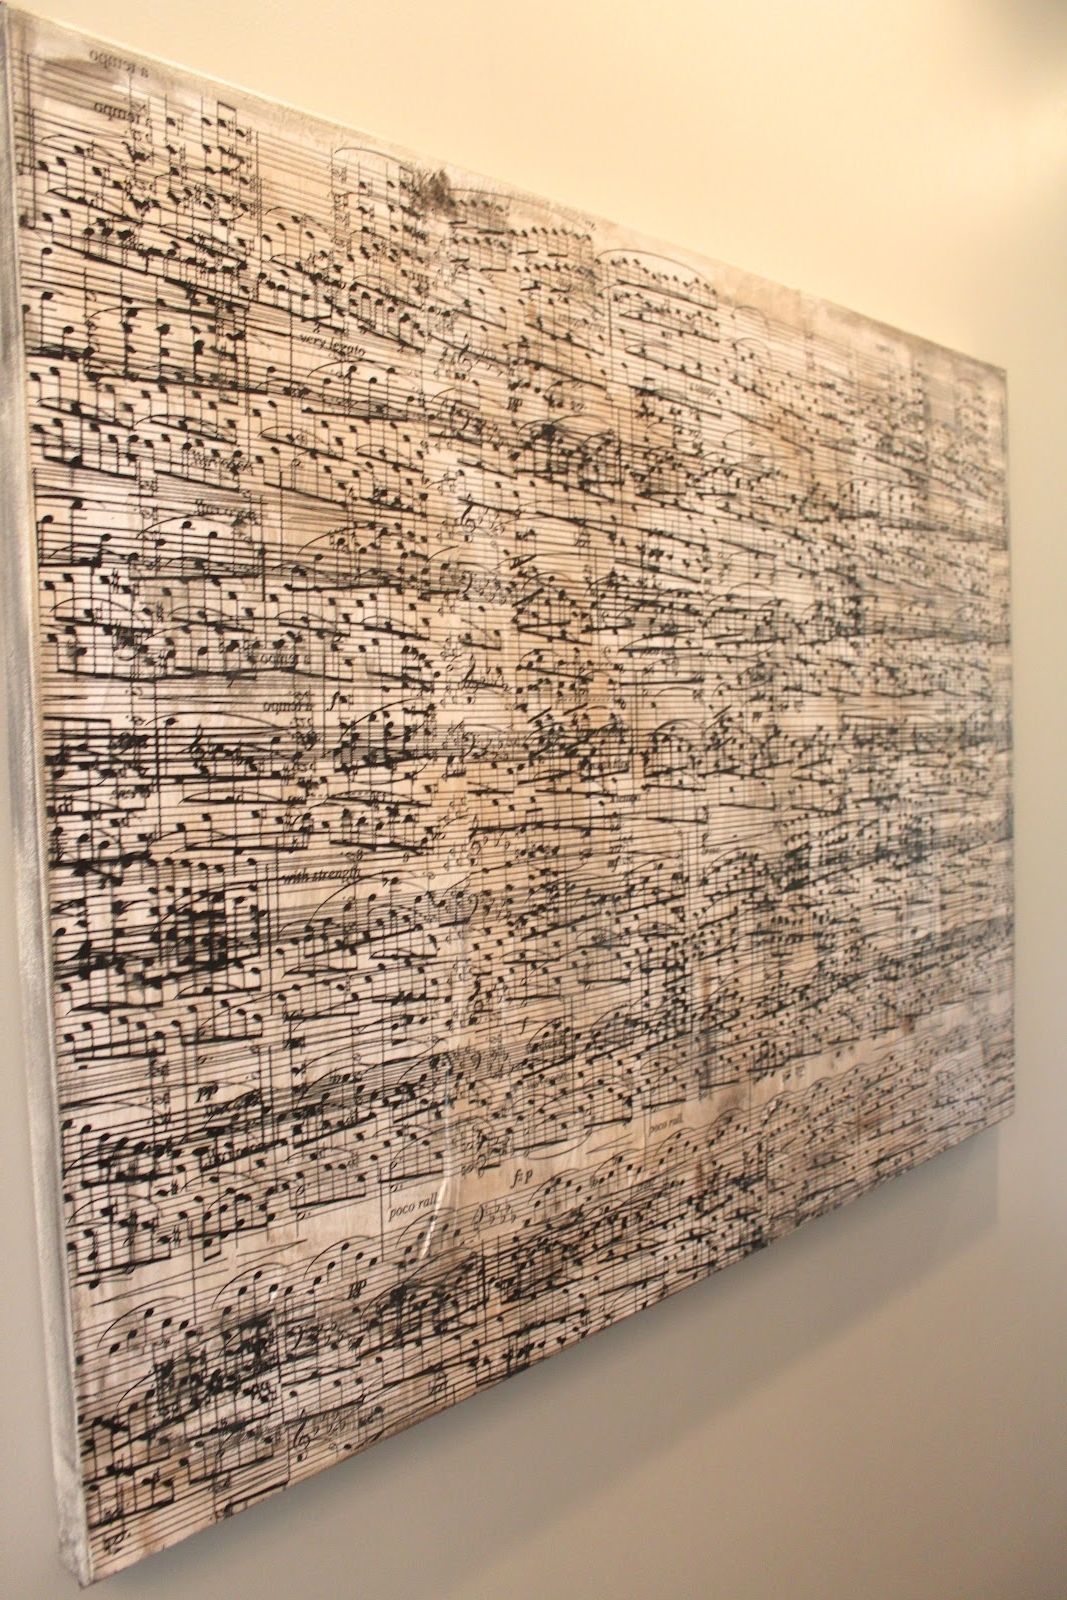 Newest Music Canvas Wall Art Intended For Amy's Casablanca: Diy Sheet Music Artwork (View 9 of 15)